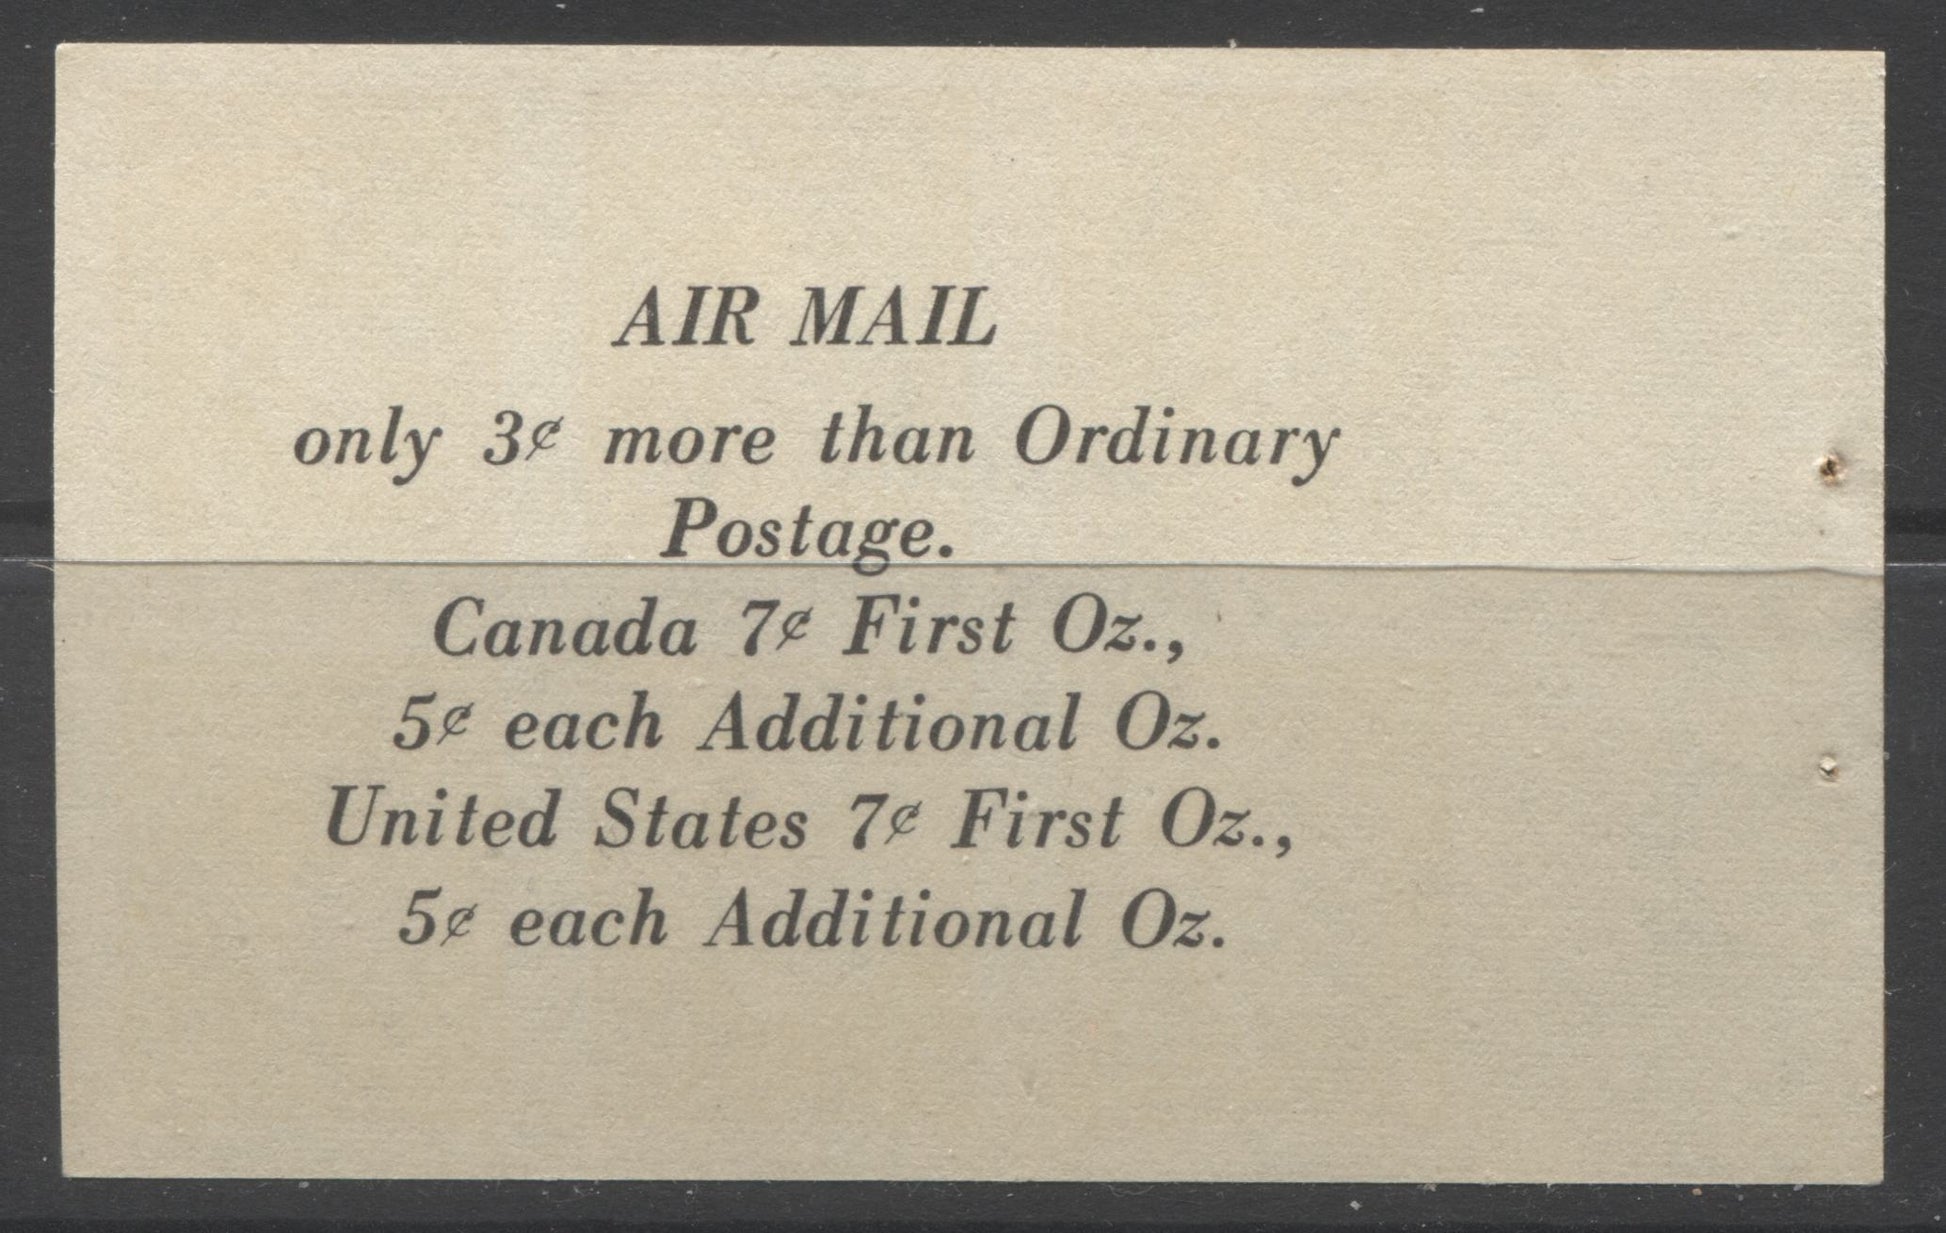 Canada #BK39a (McCann #39b) 1942-1949 War Issue Complete $1.00, English Booklet Containing 1 Pane Each of 6 of 3c and 4c Plus 2 Panes of 4 7c Airmail Stamps, 14 mm Staple, Brown and Light Orange Cover, Constant Donut Flaw Above "T" of Postage Brixton Chrome 